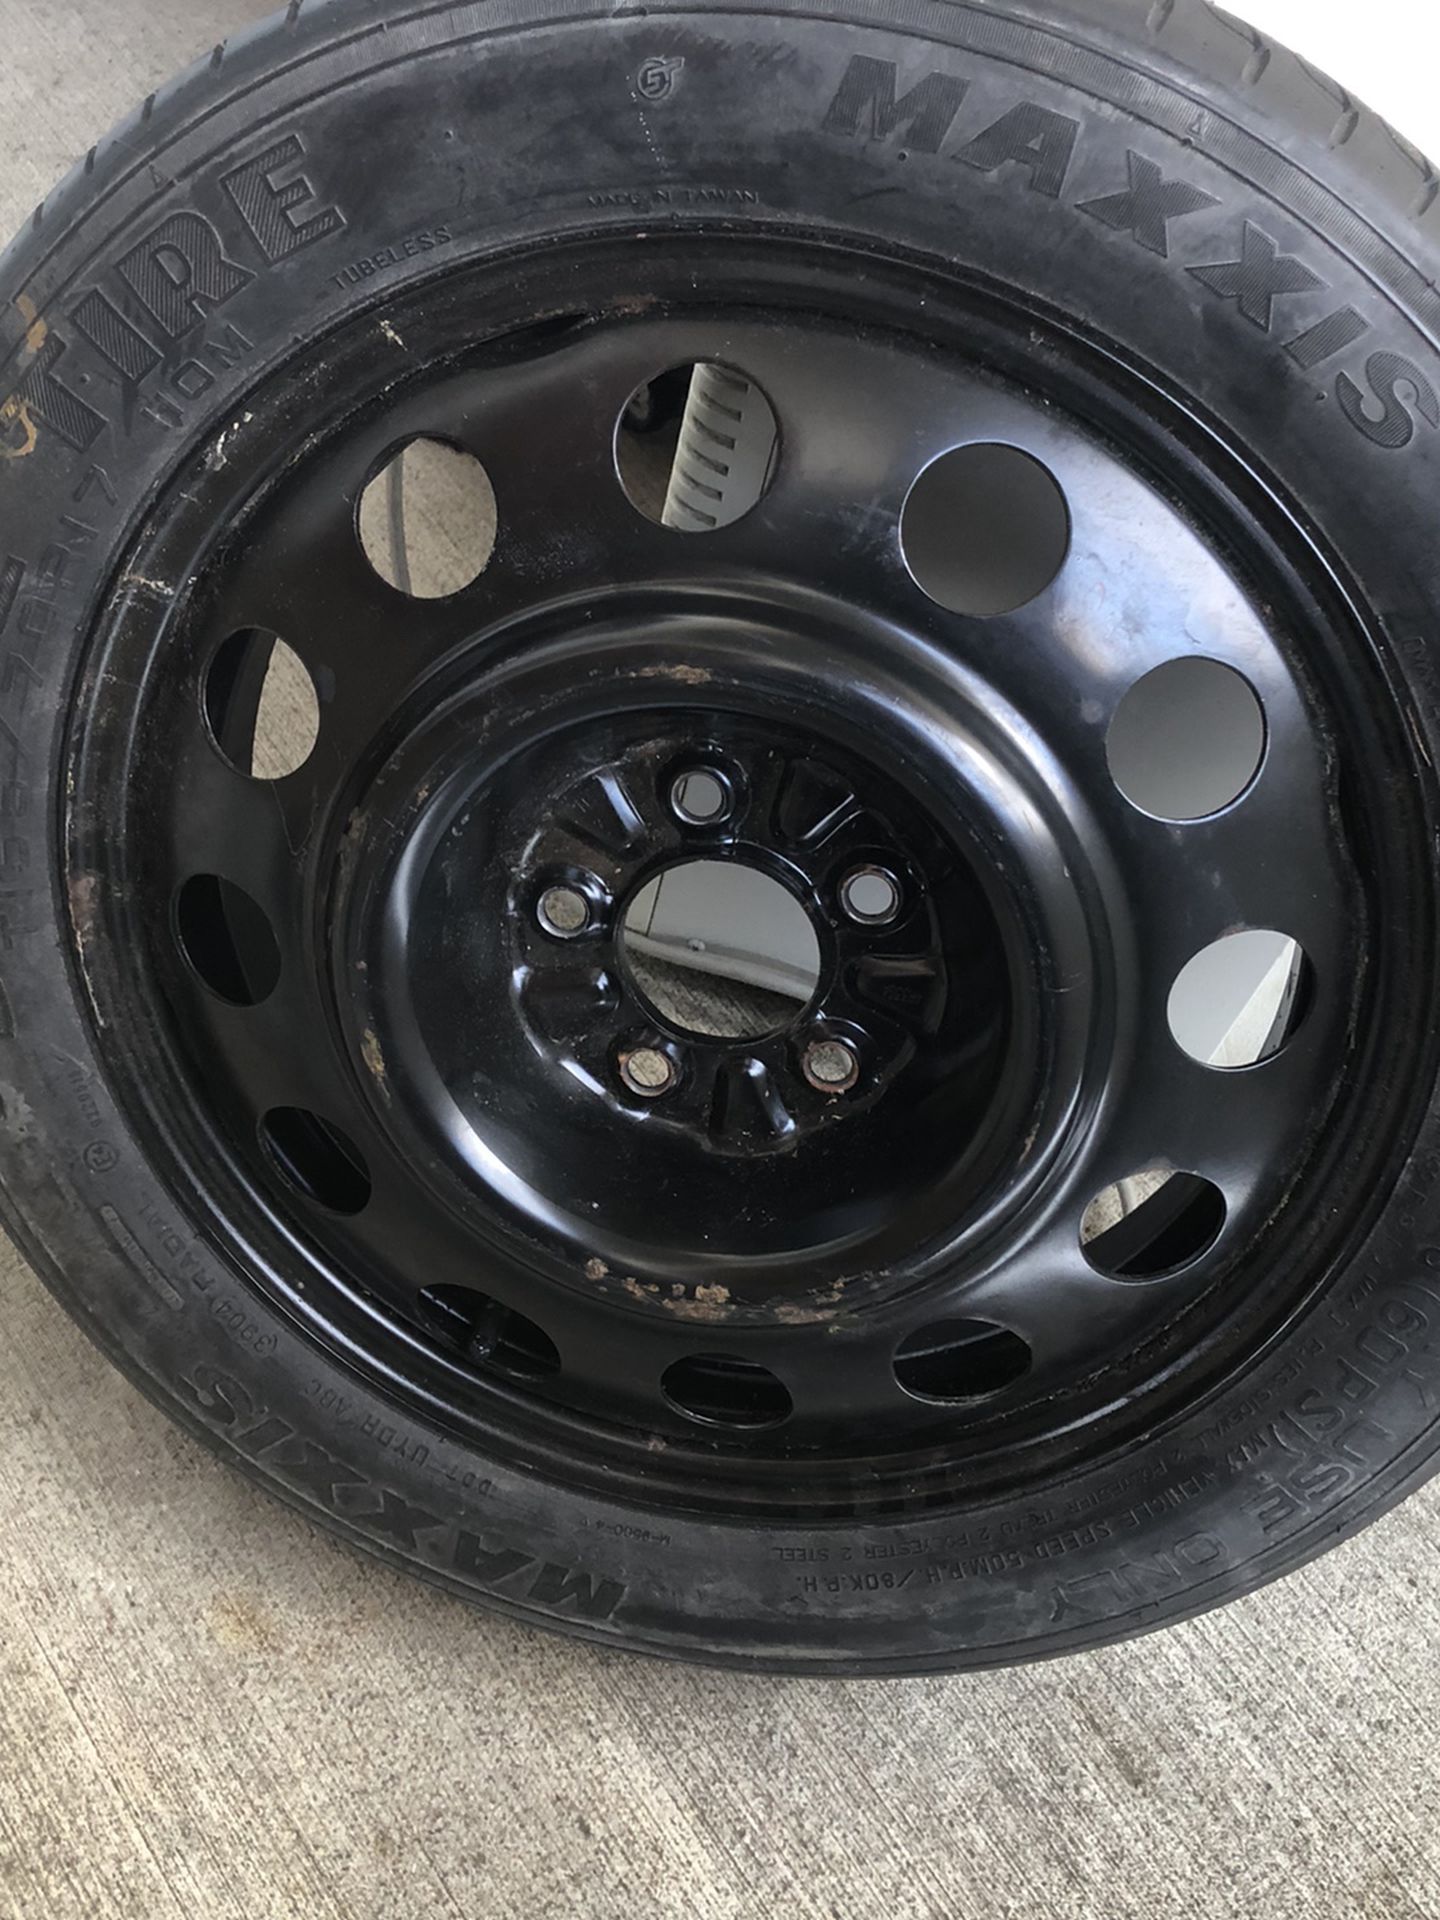 Spare tire for Ford Mustang Brand new never used$50, Bike rack fits 3 bikes $35, car left Jack $25, Mounted Roof Cross Bars $80, Ford mustang original